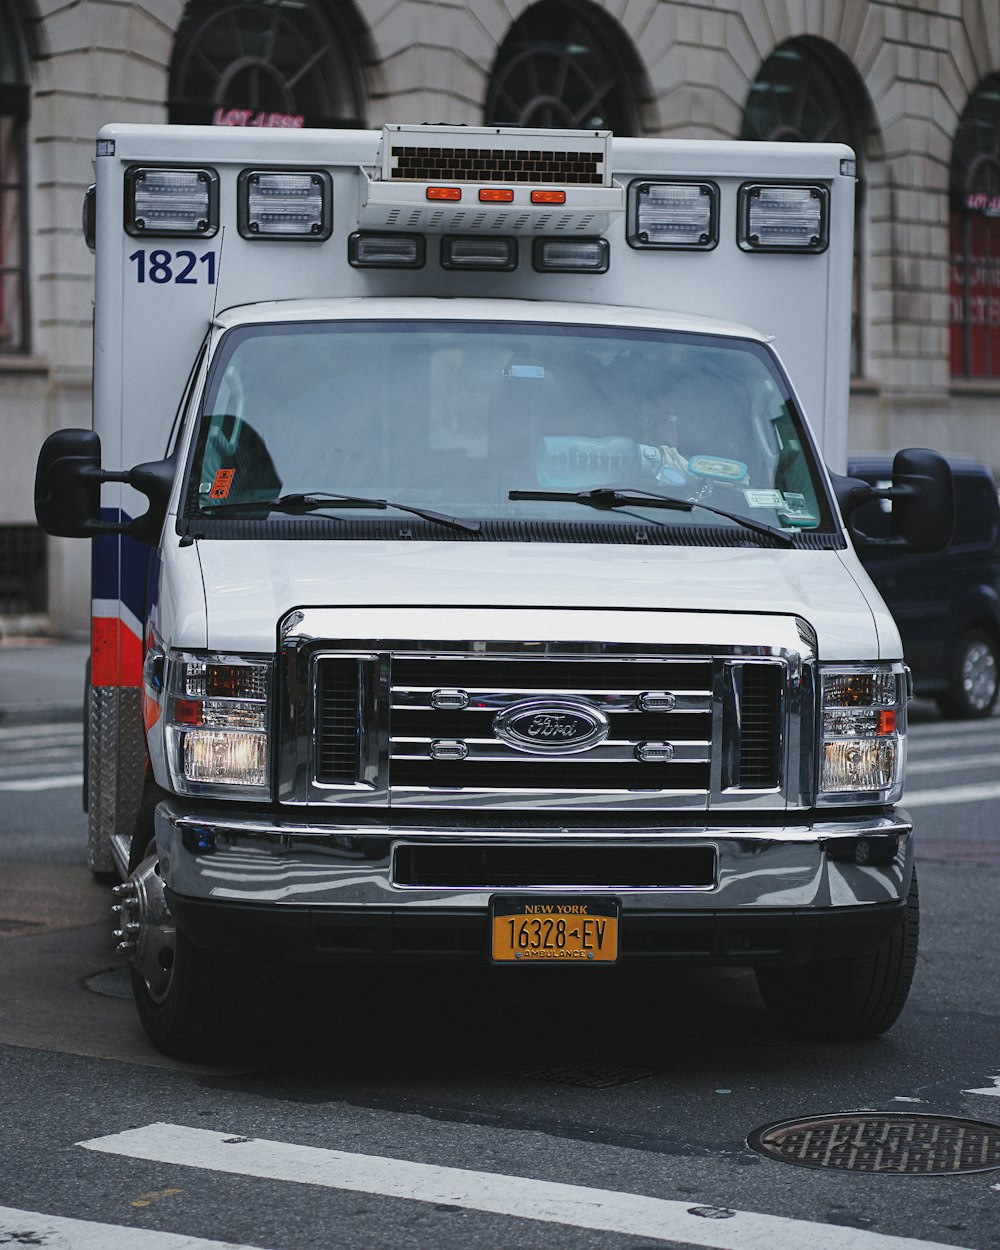 an ambulance parked on the side of the road